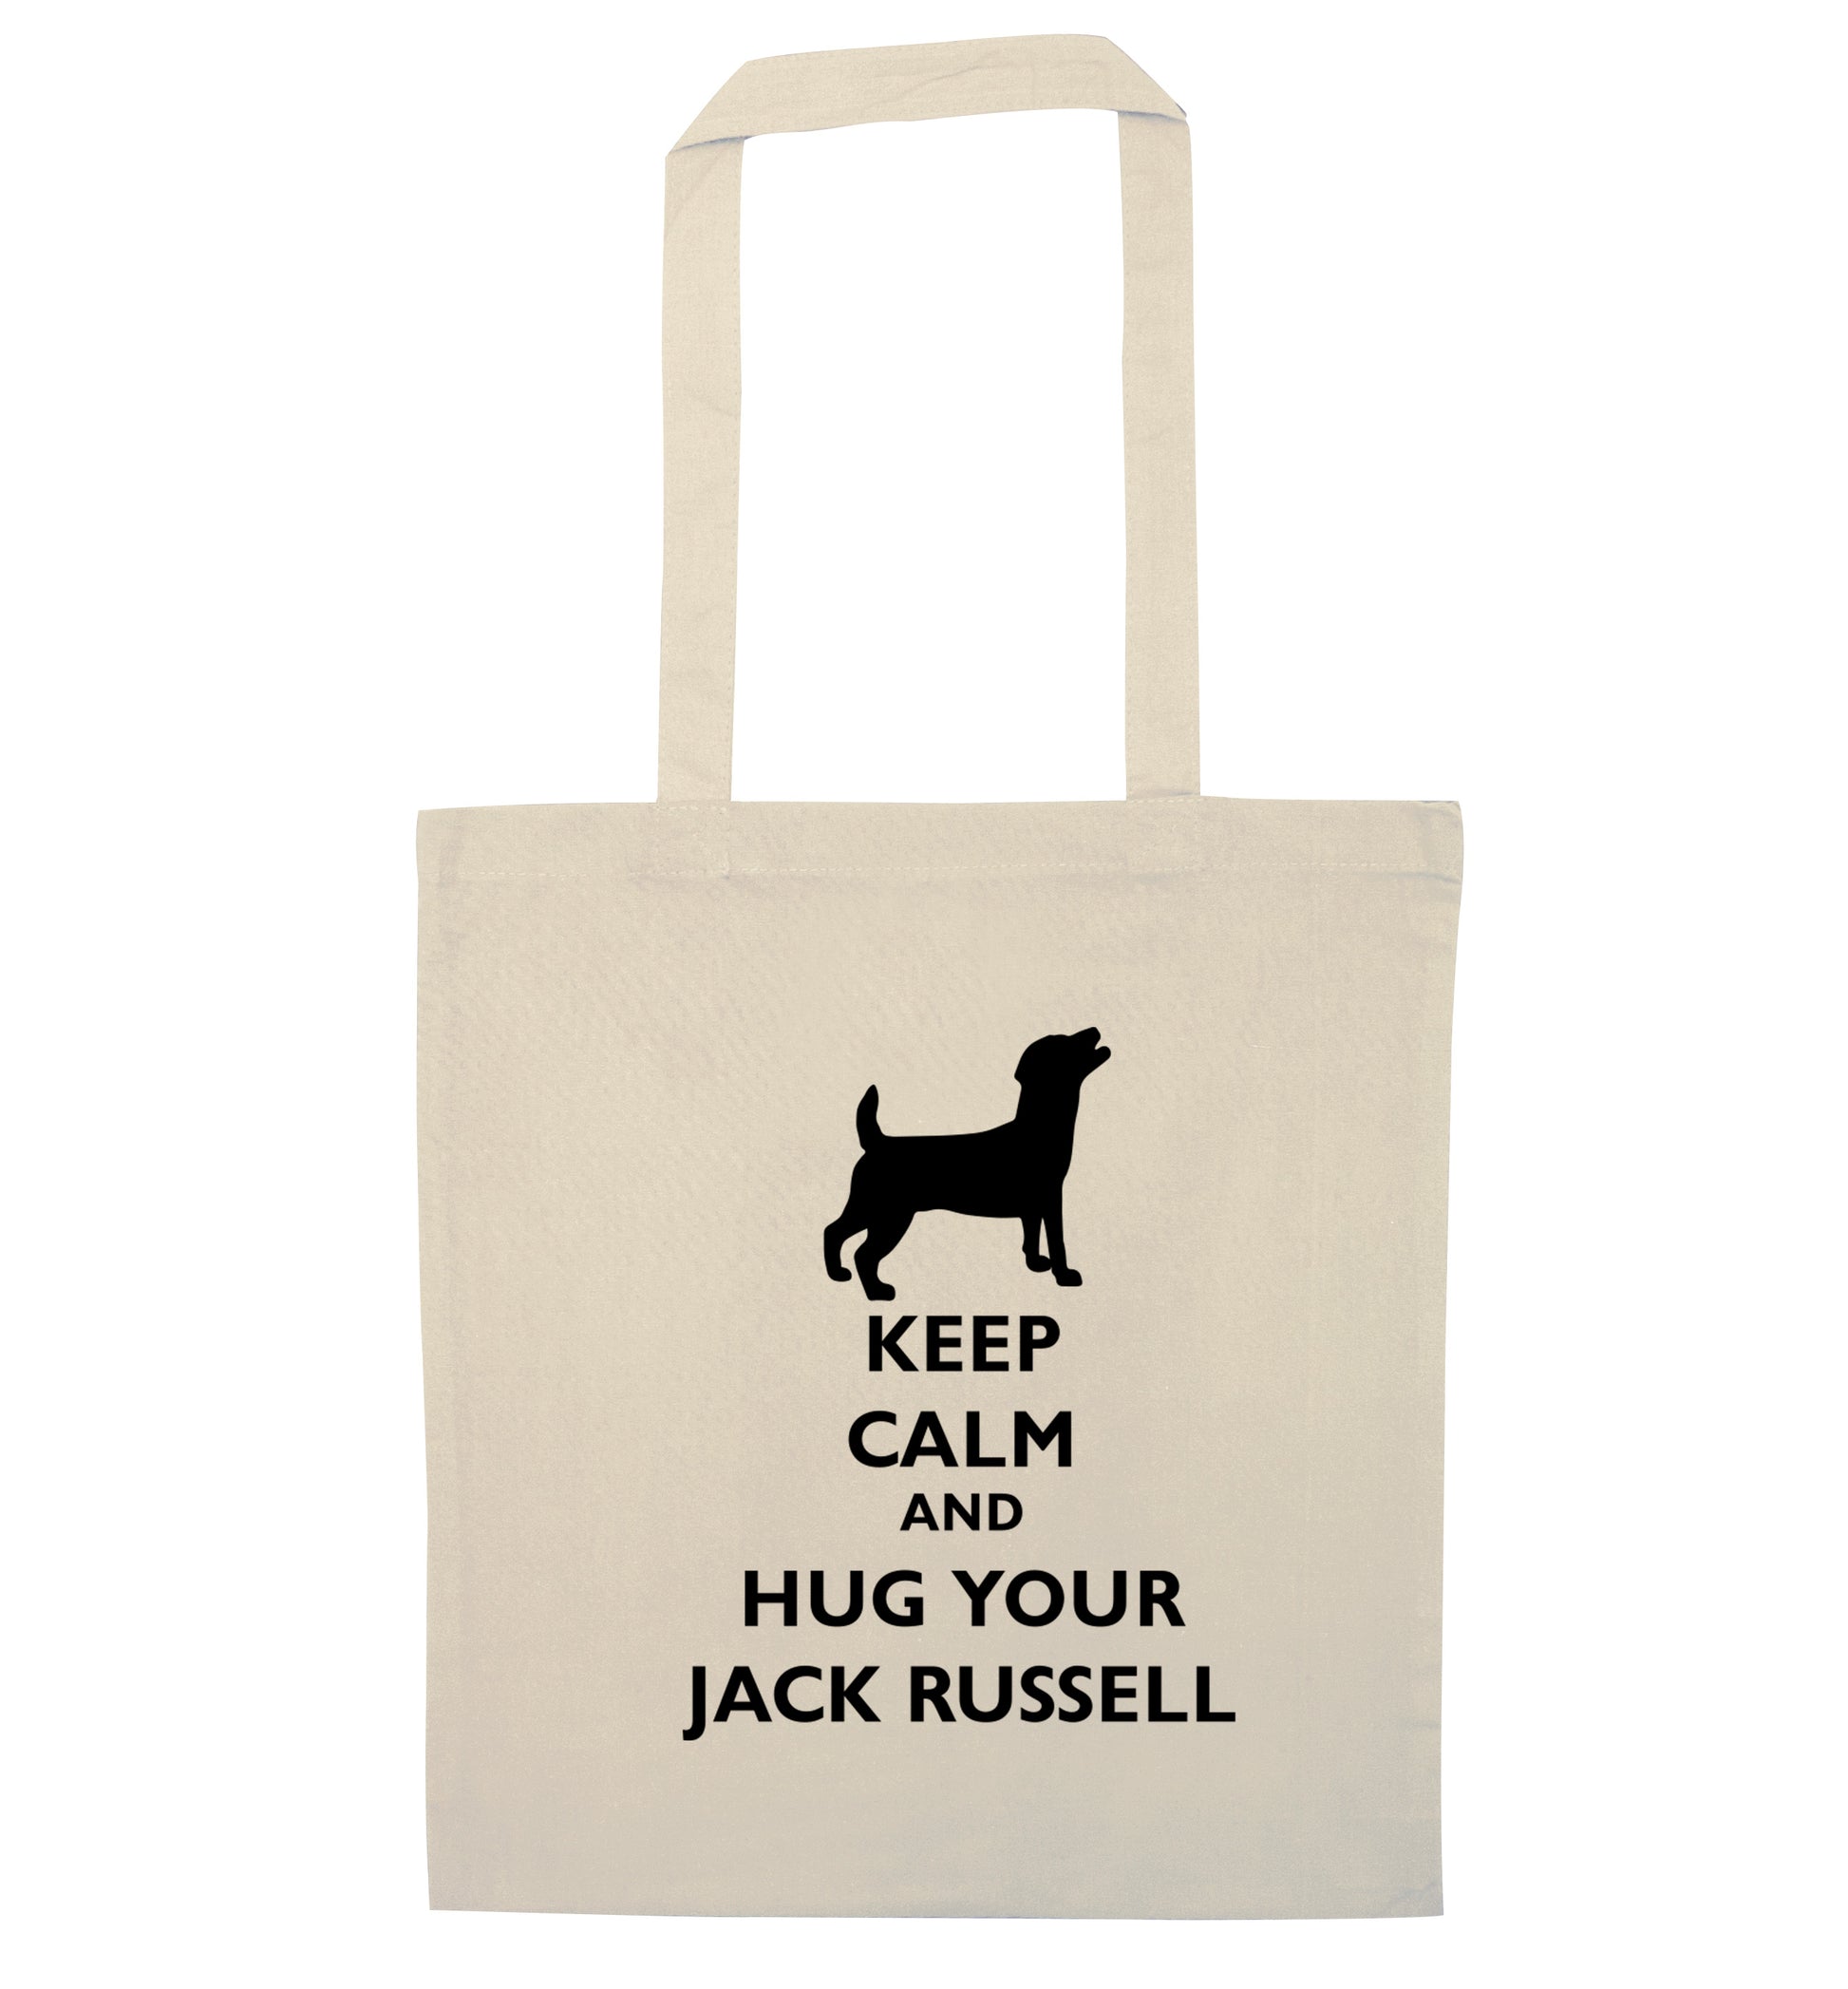 Keep calm and hug your jack russell natural tote bag